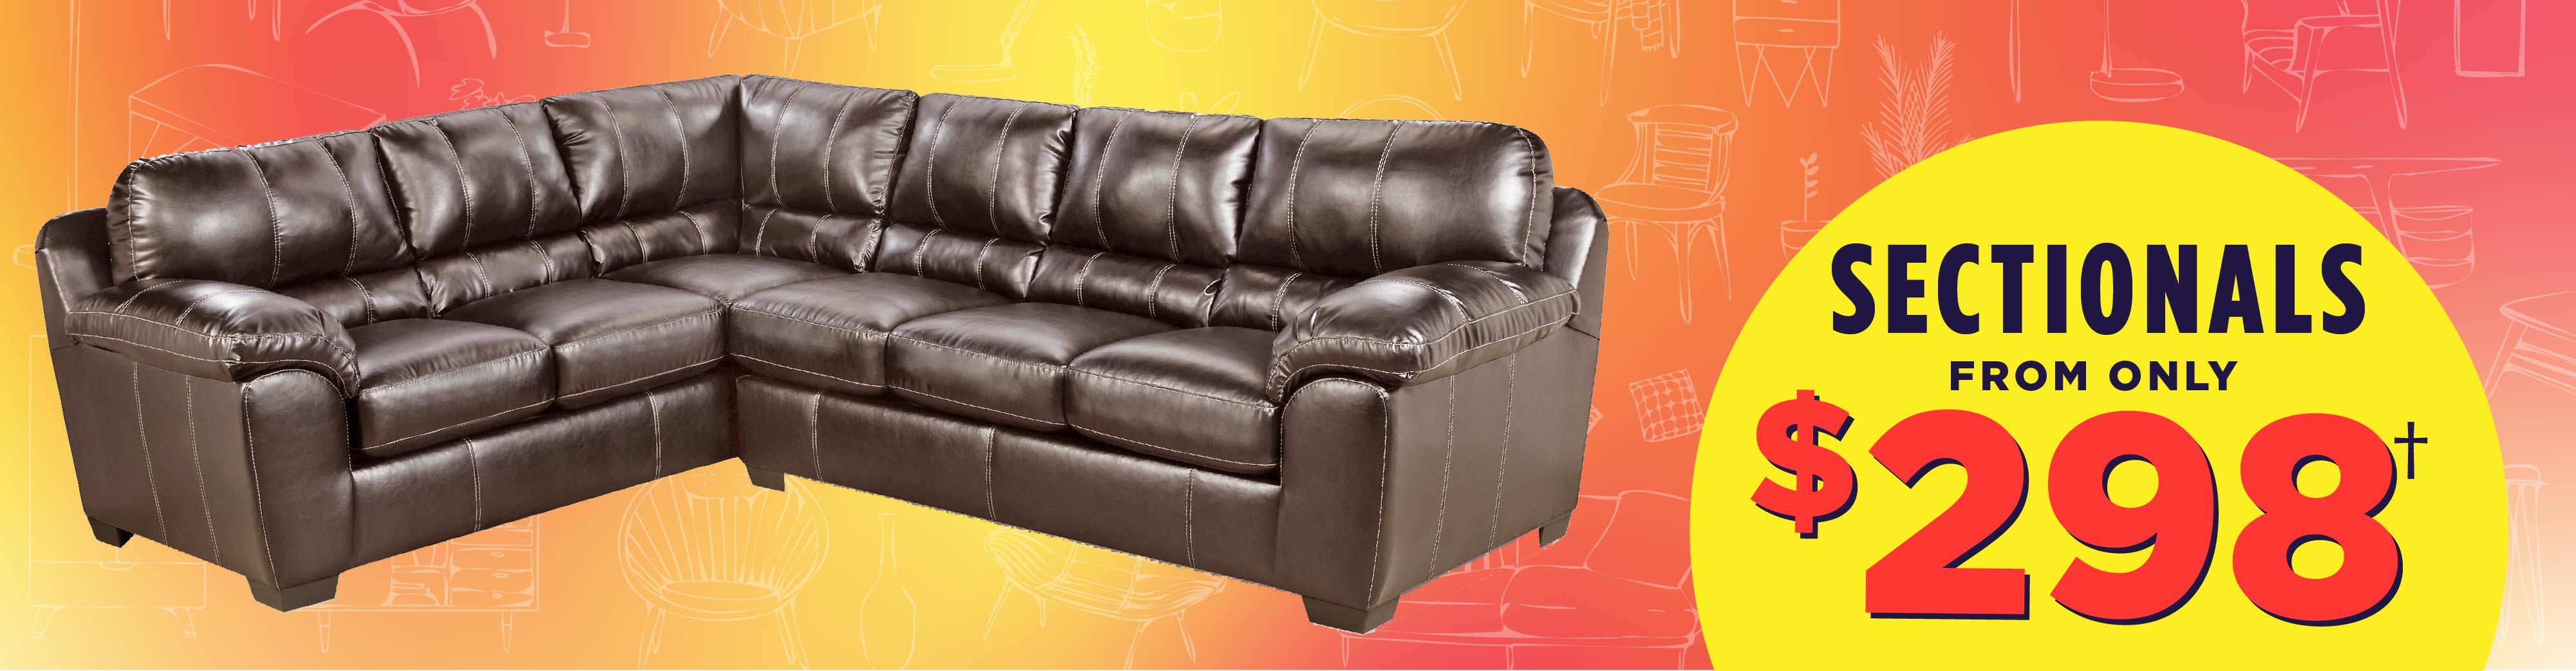 Sectionals from only $298!